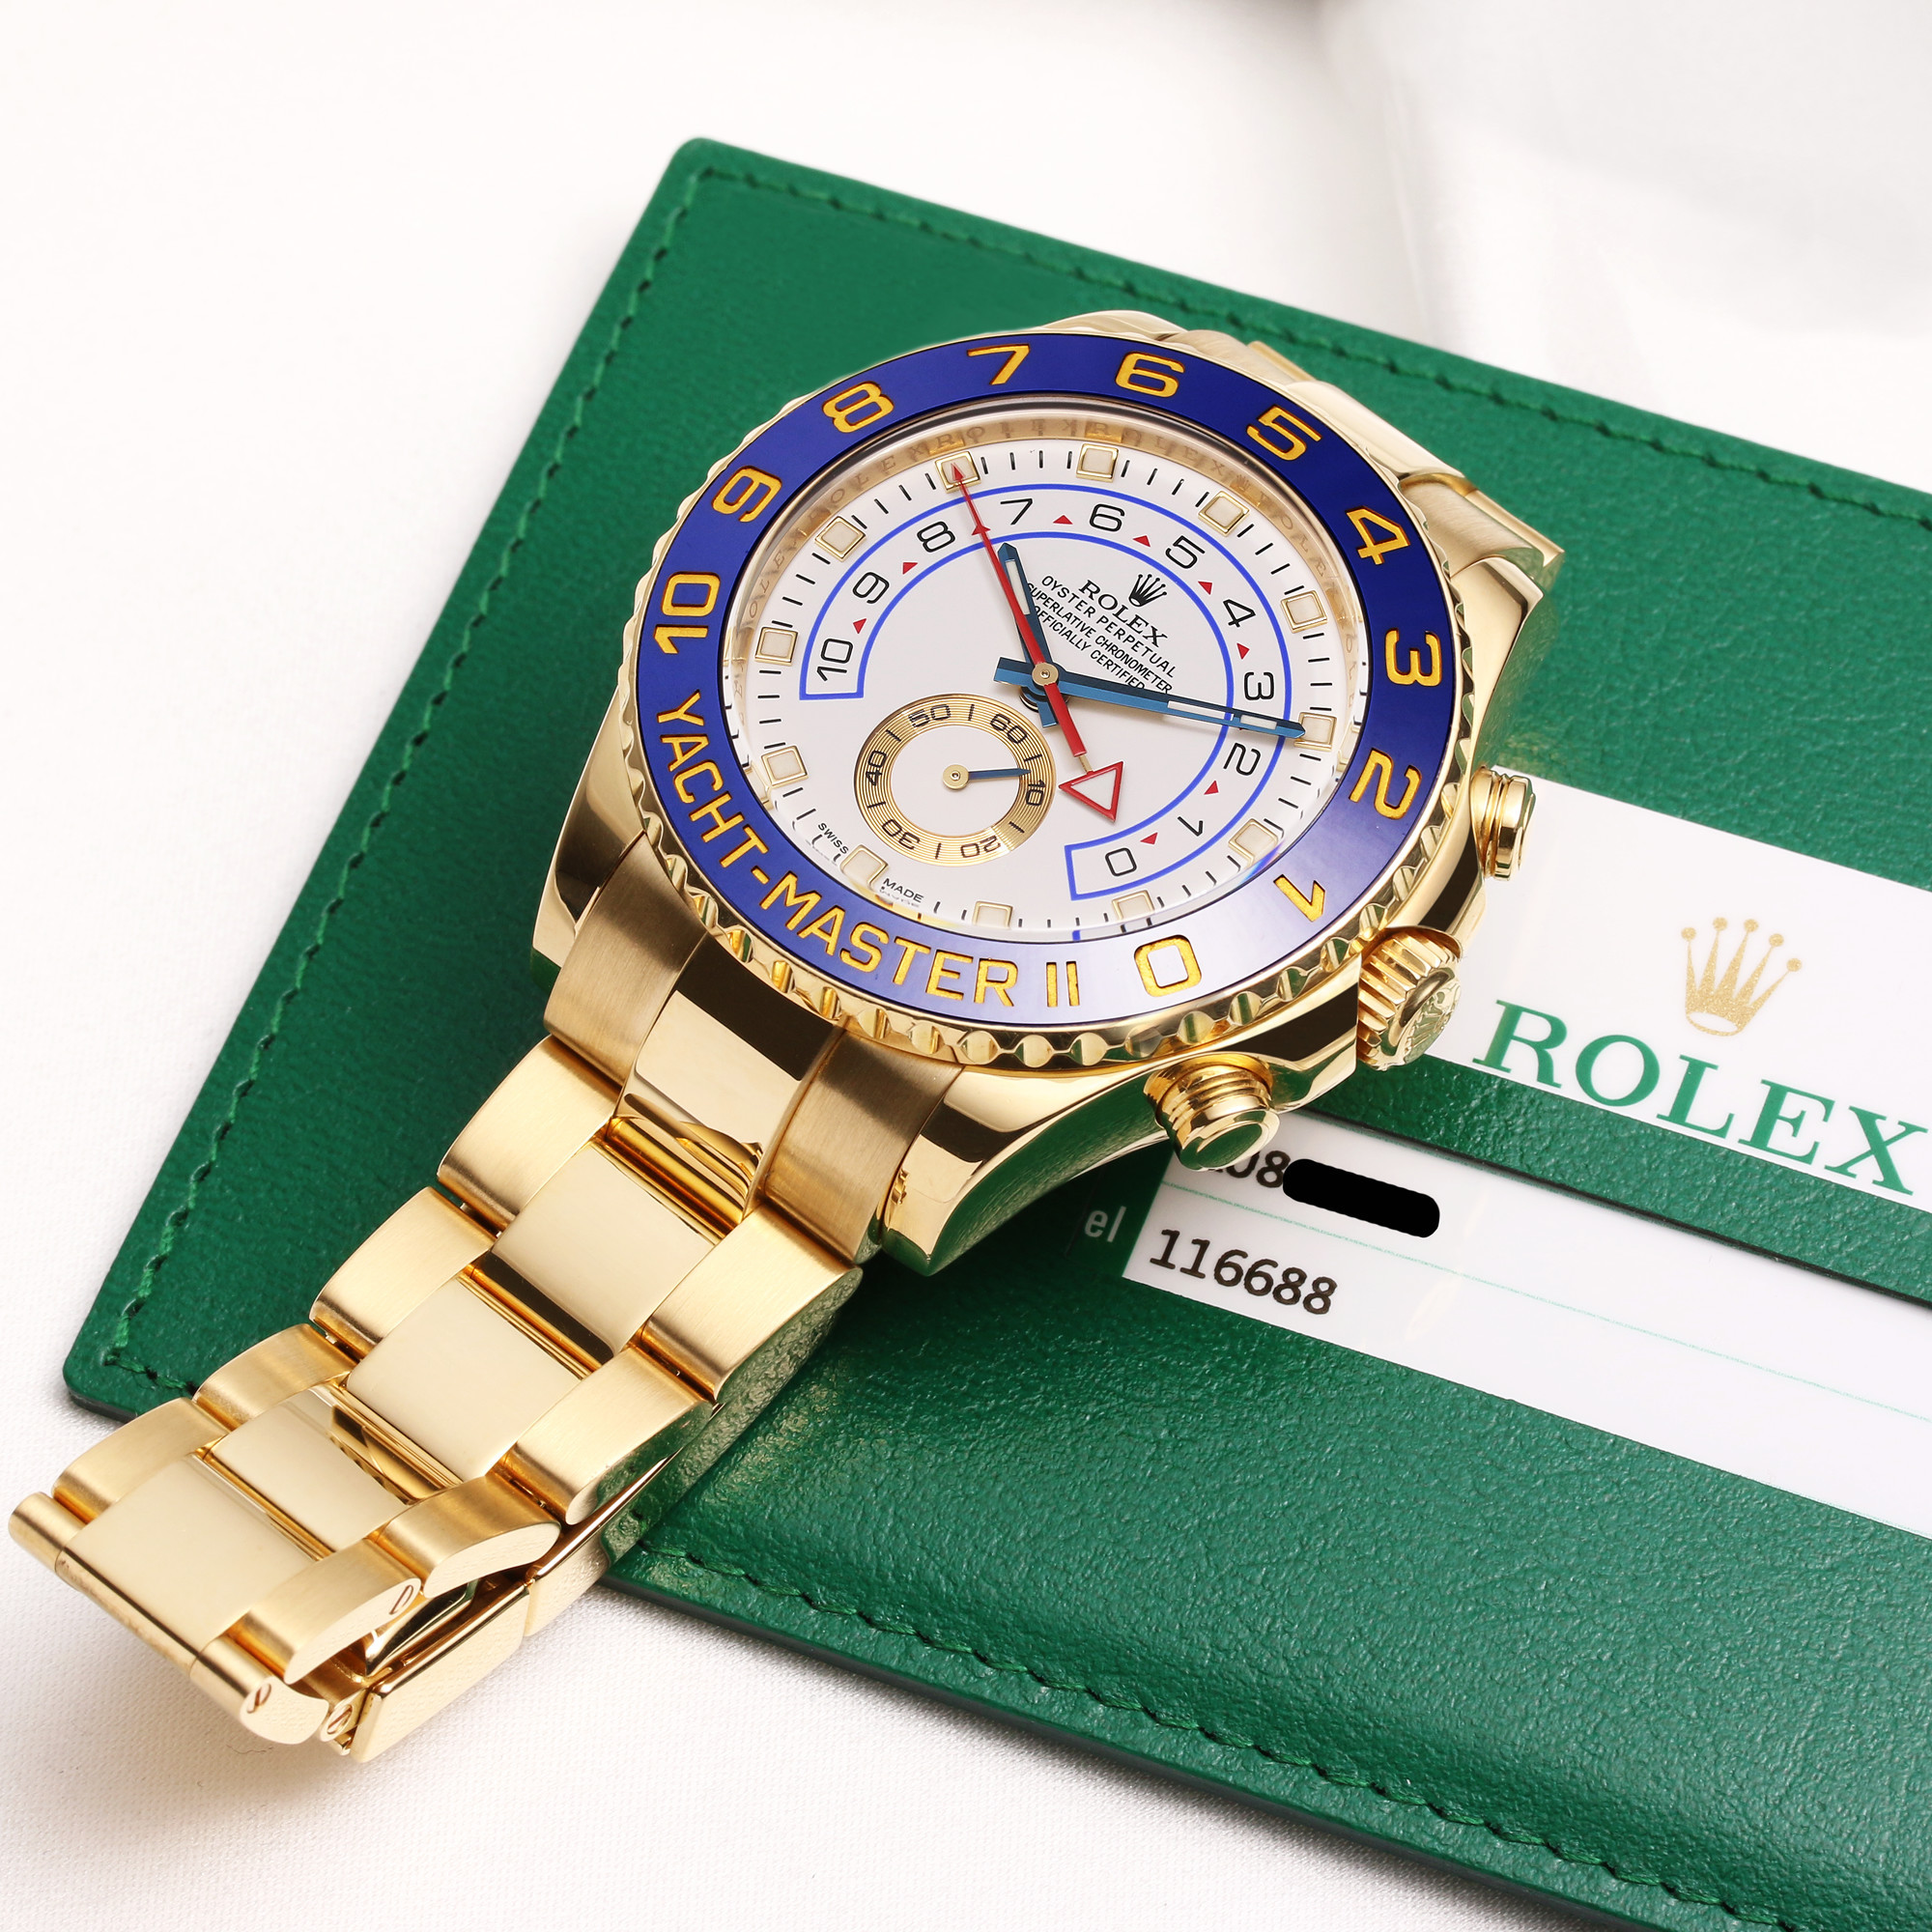 The luxury fake watches are made from gold.